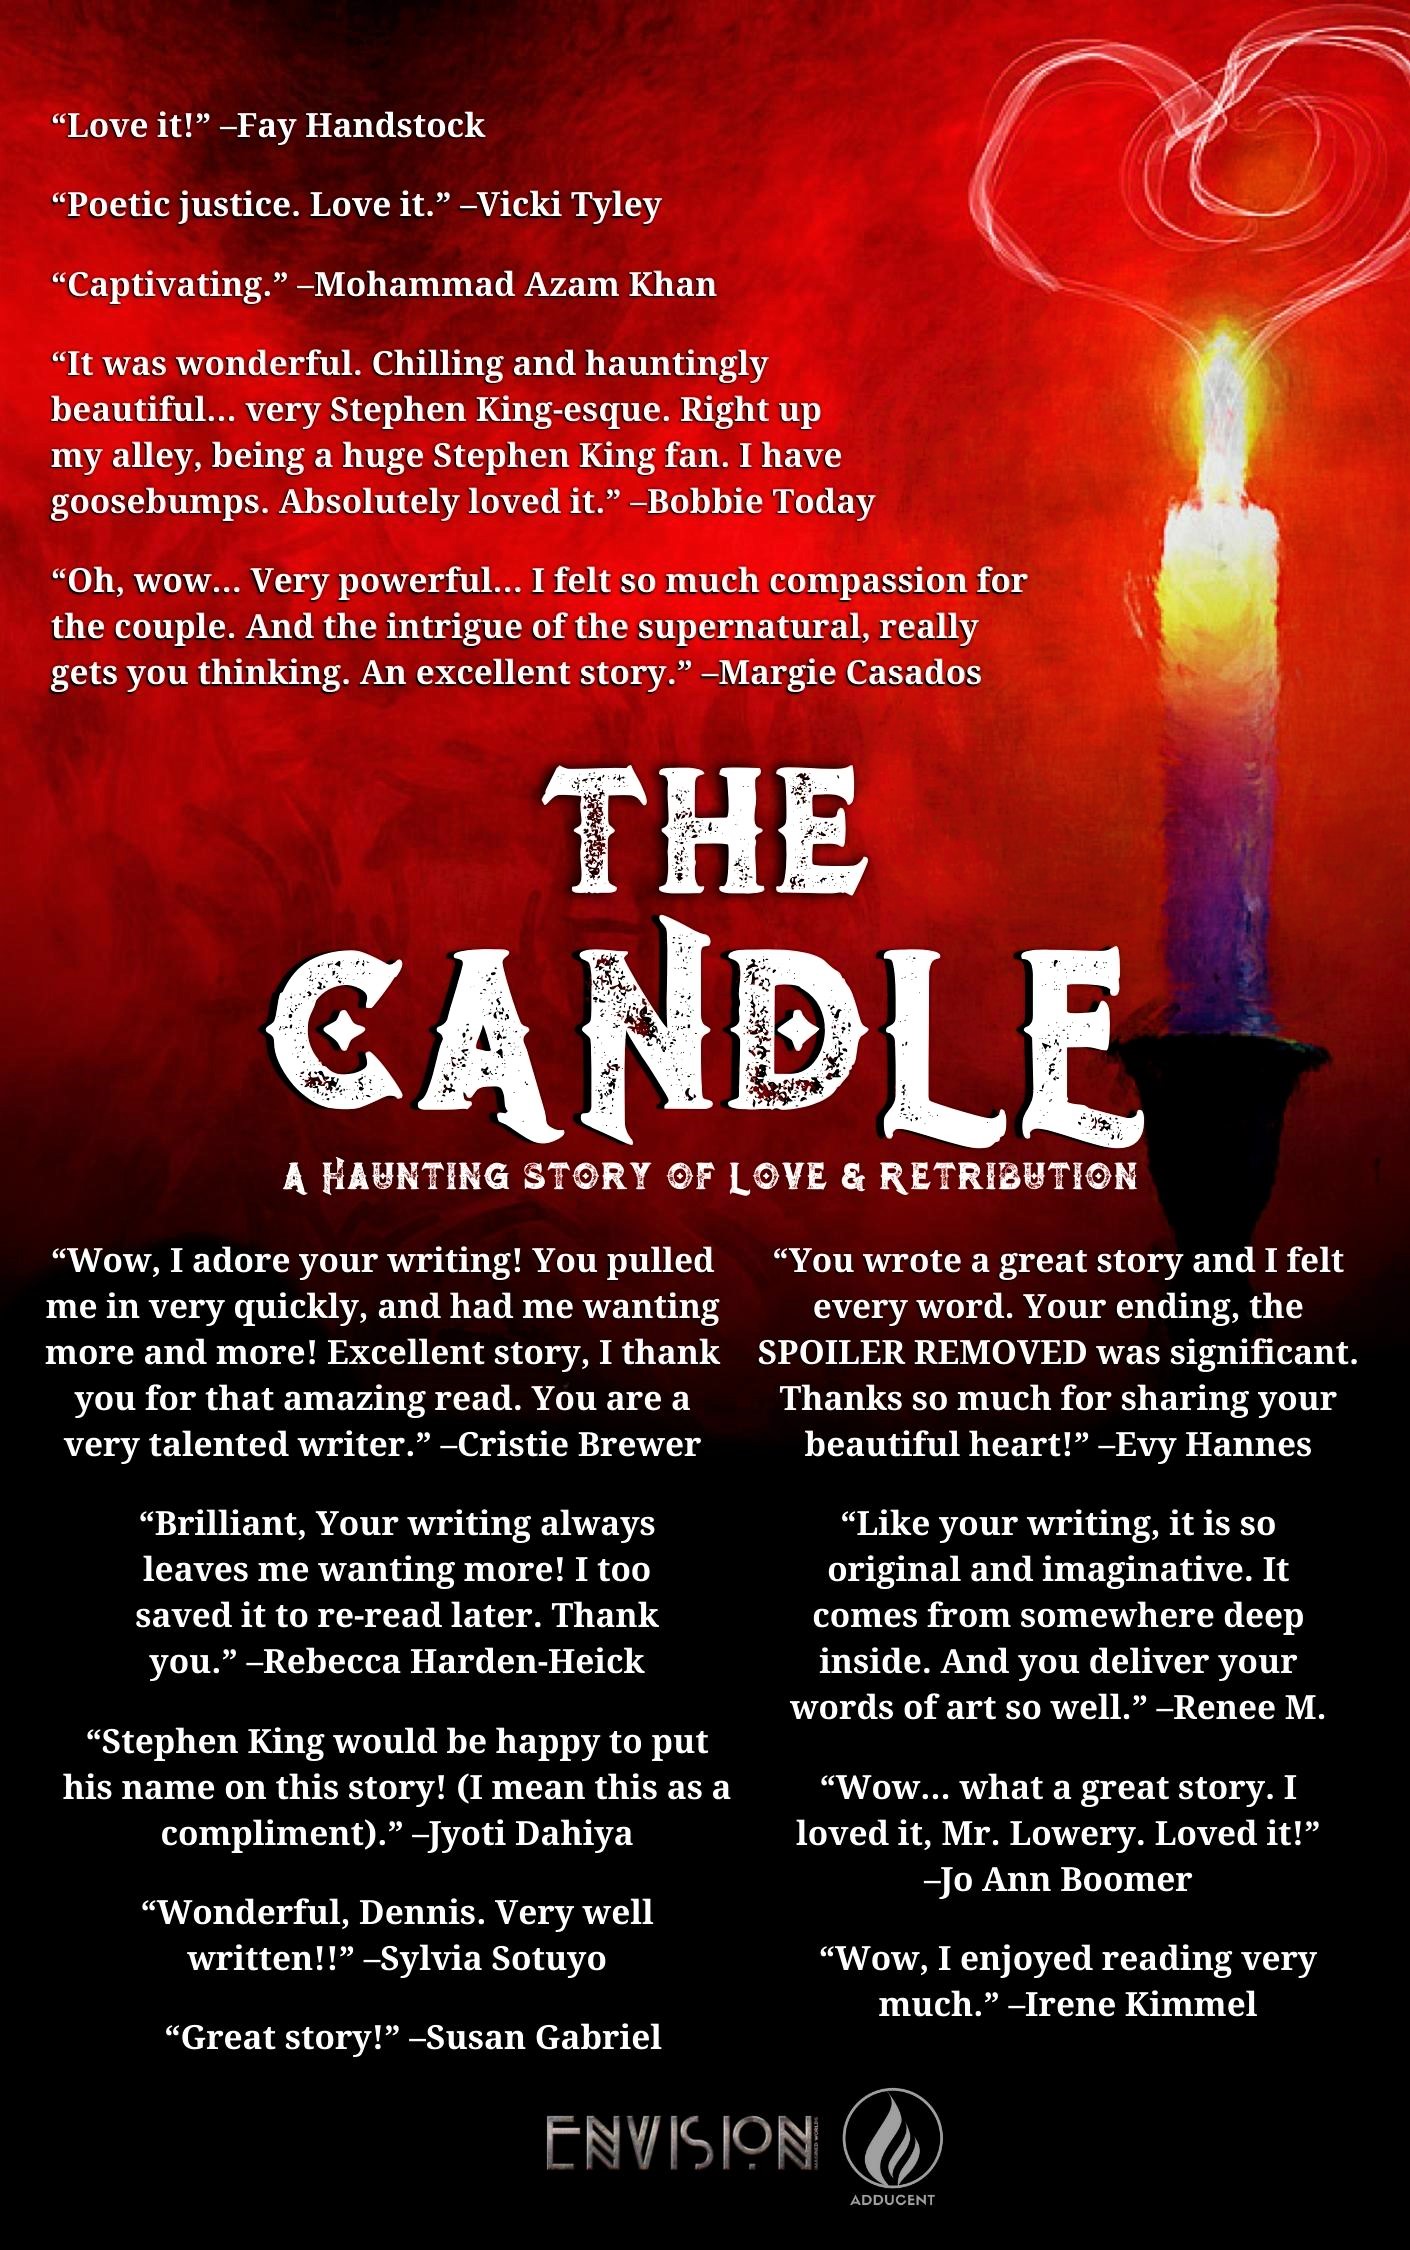 THE CANDLE - A Haunting Story of Love and Retribution from Dennis Lowery.